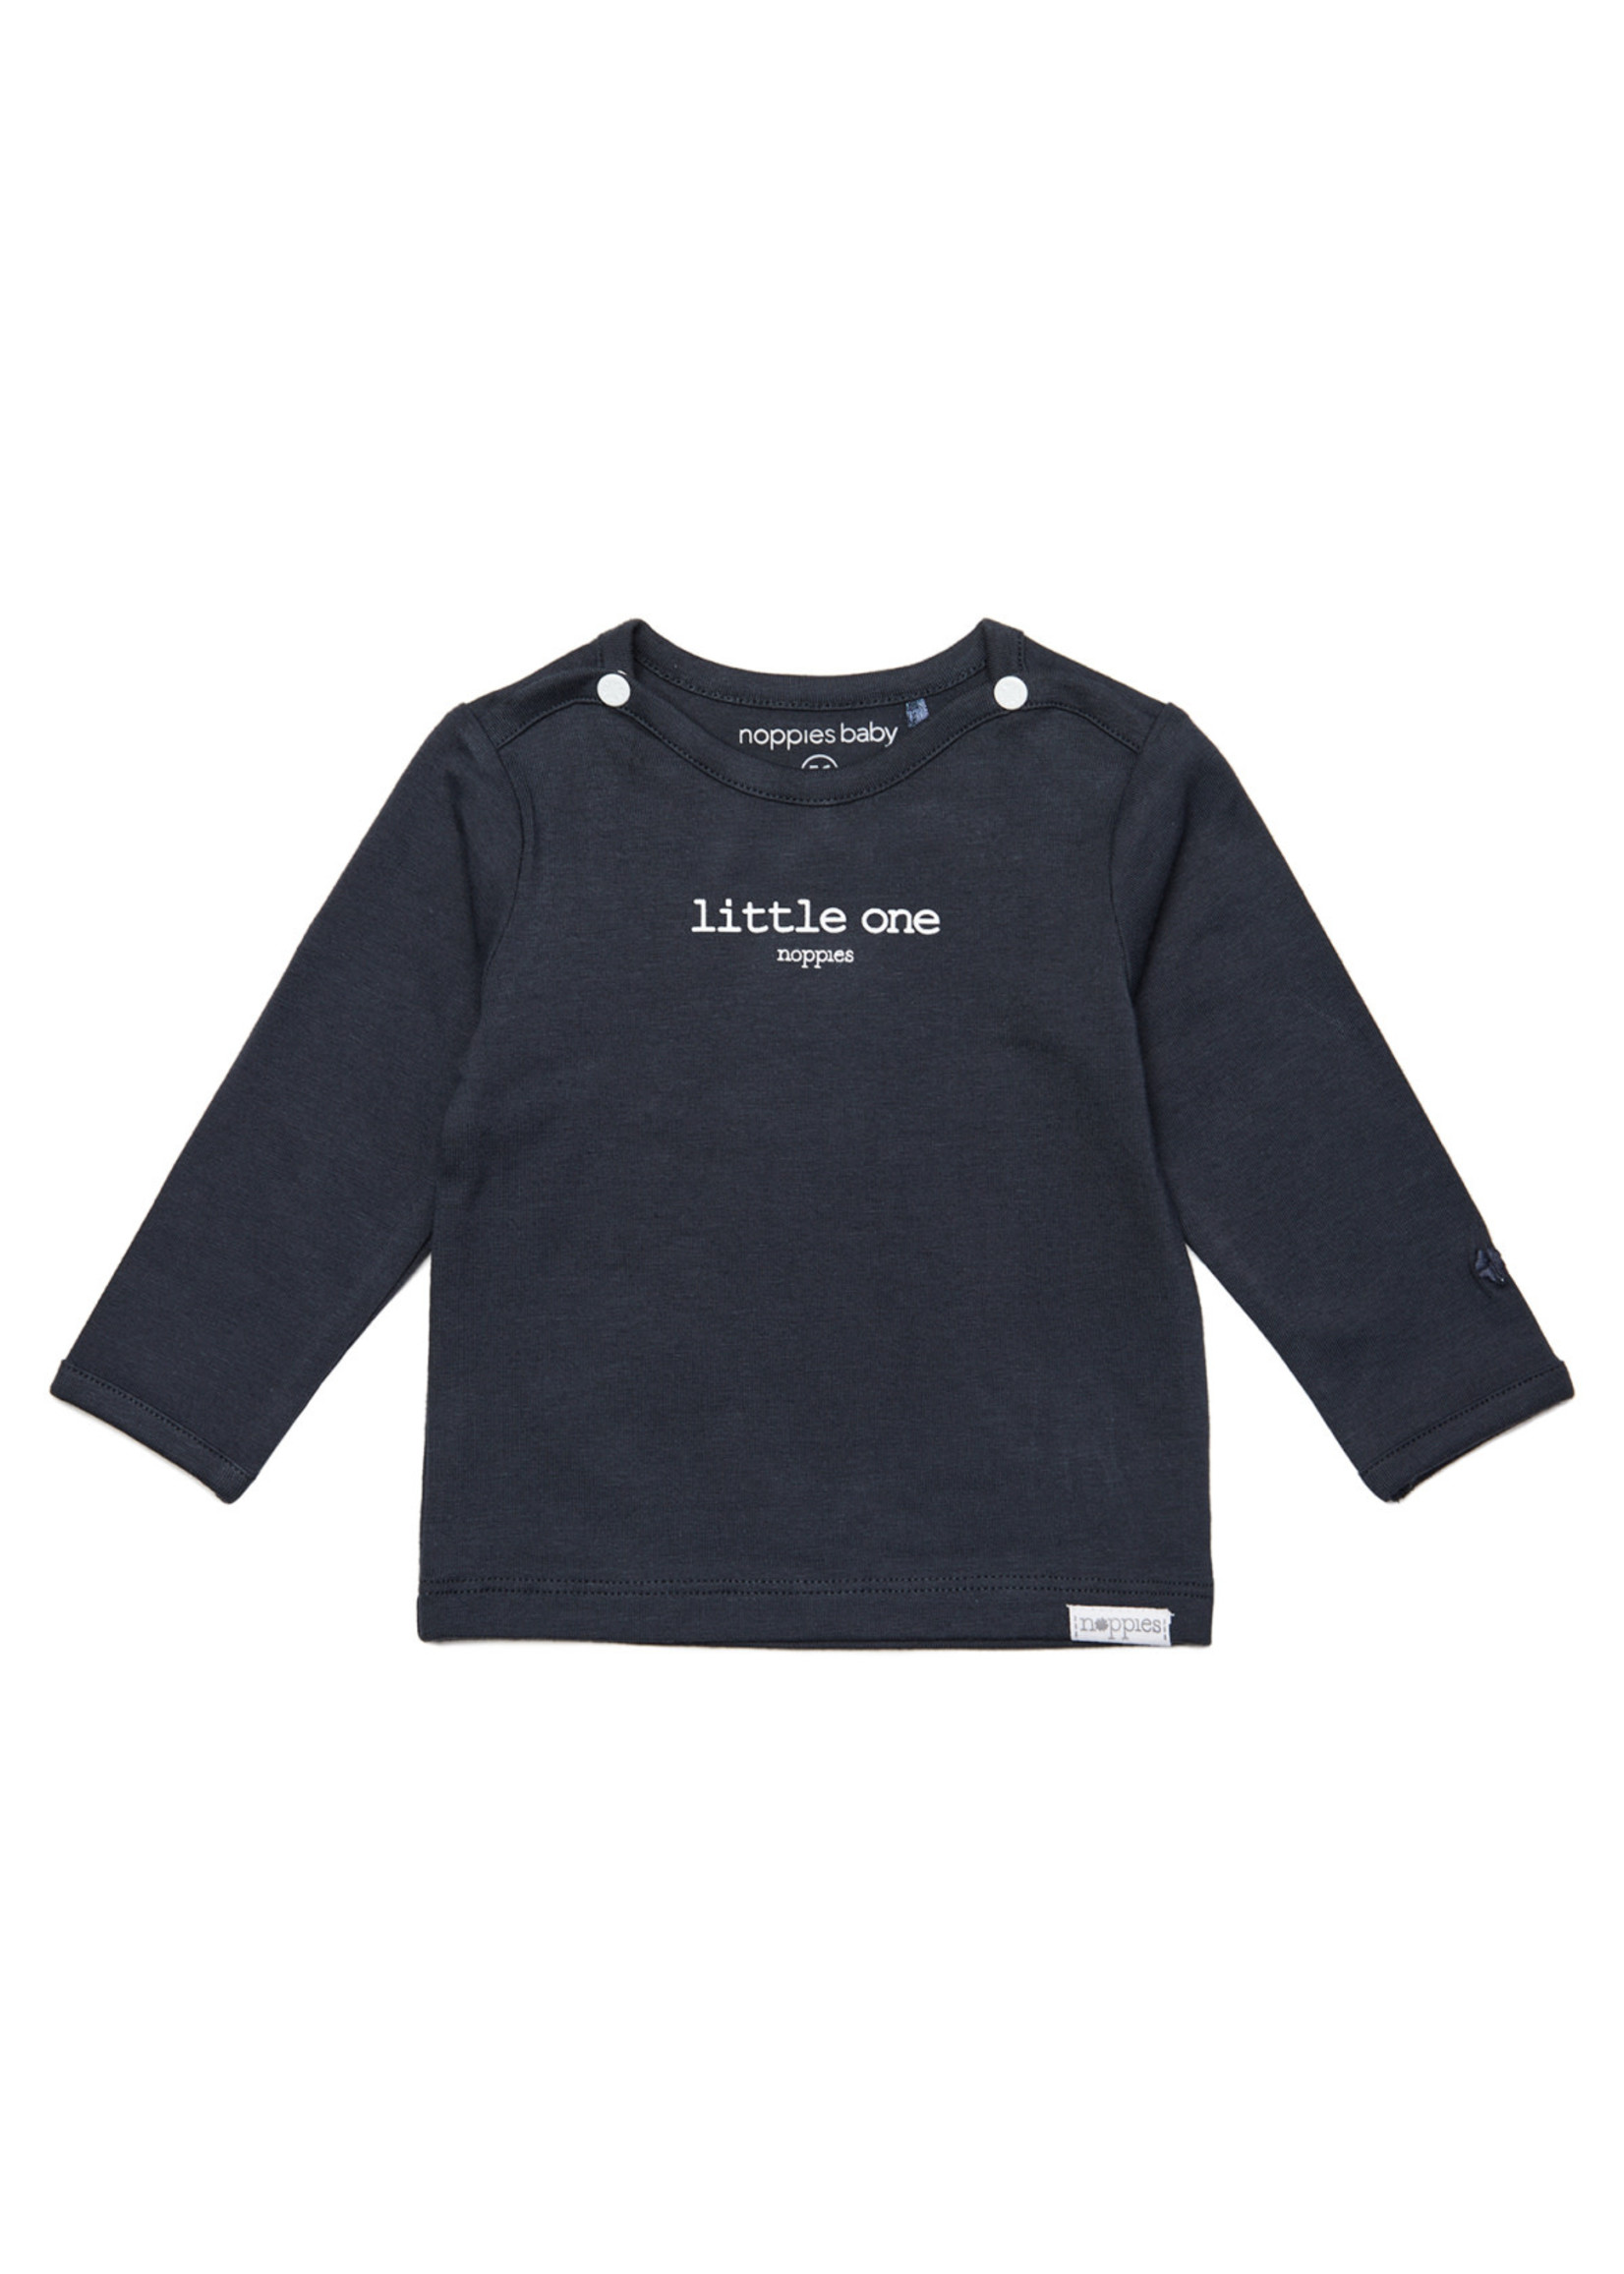 Noppies T-shirt Hester Charcoal 0M